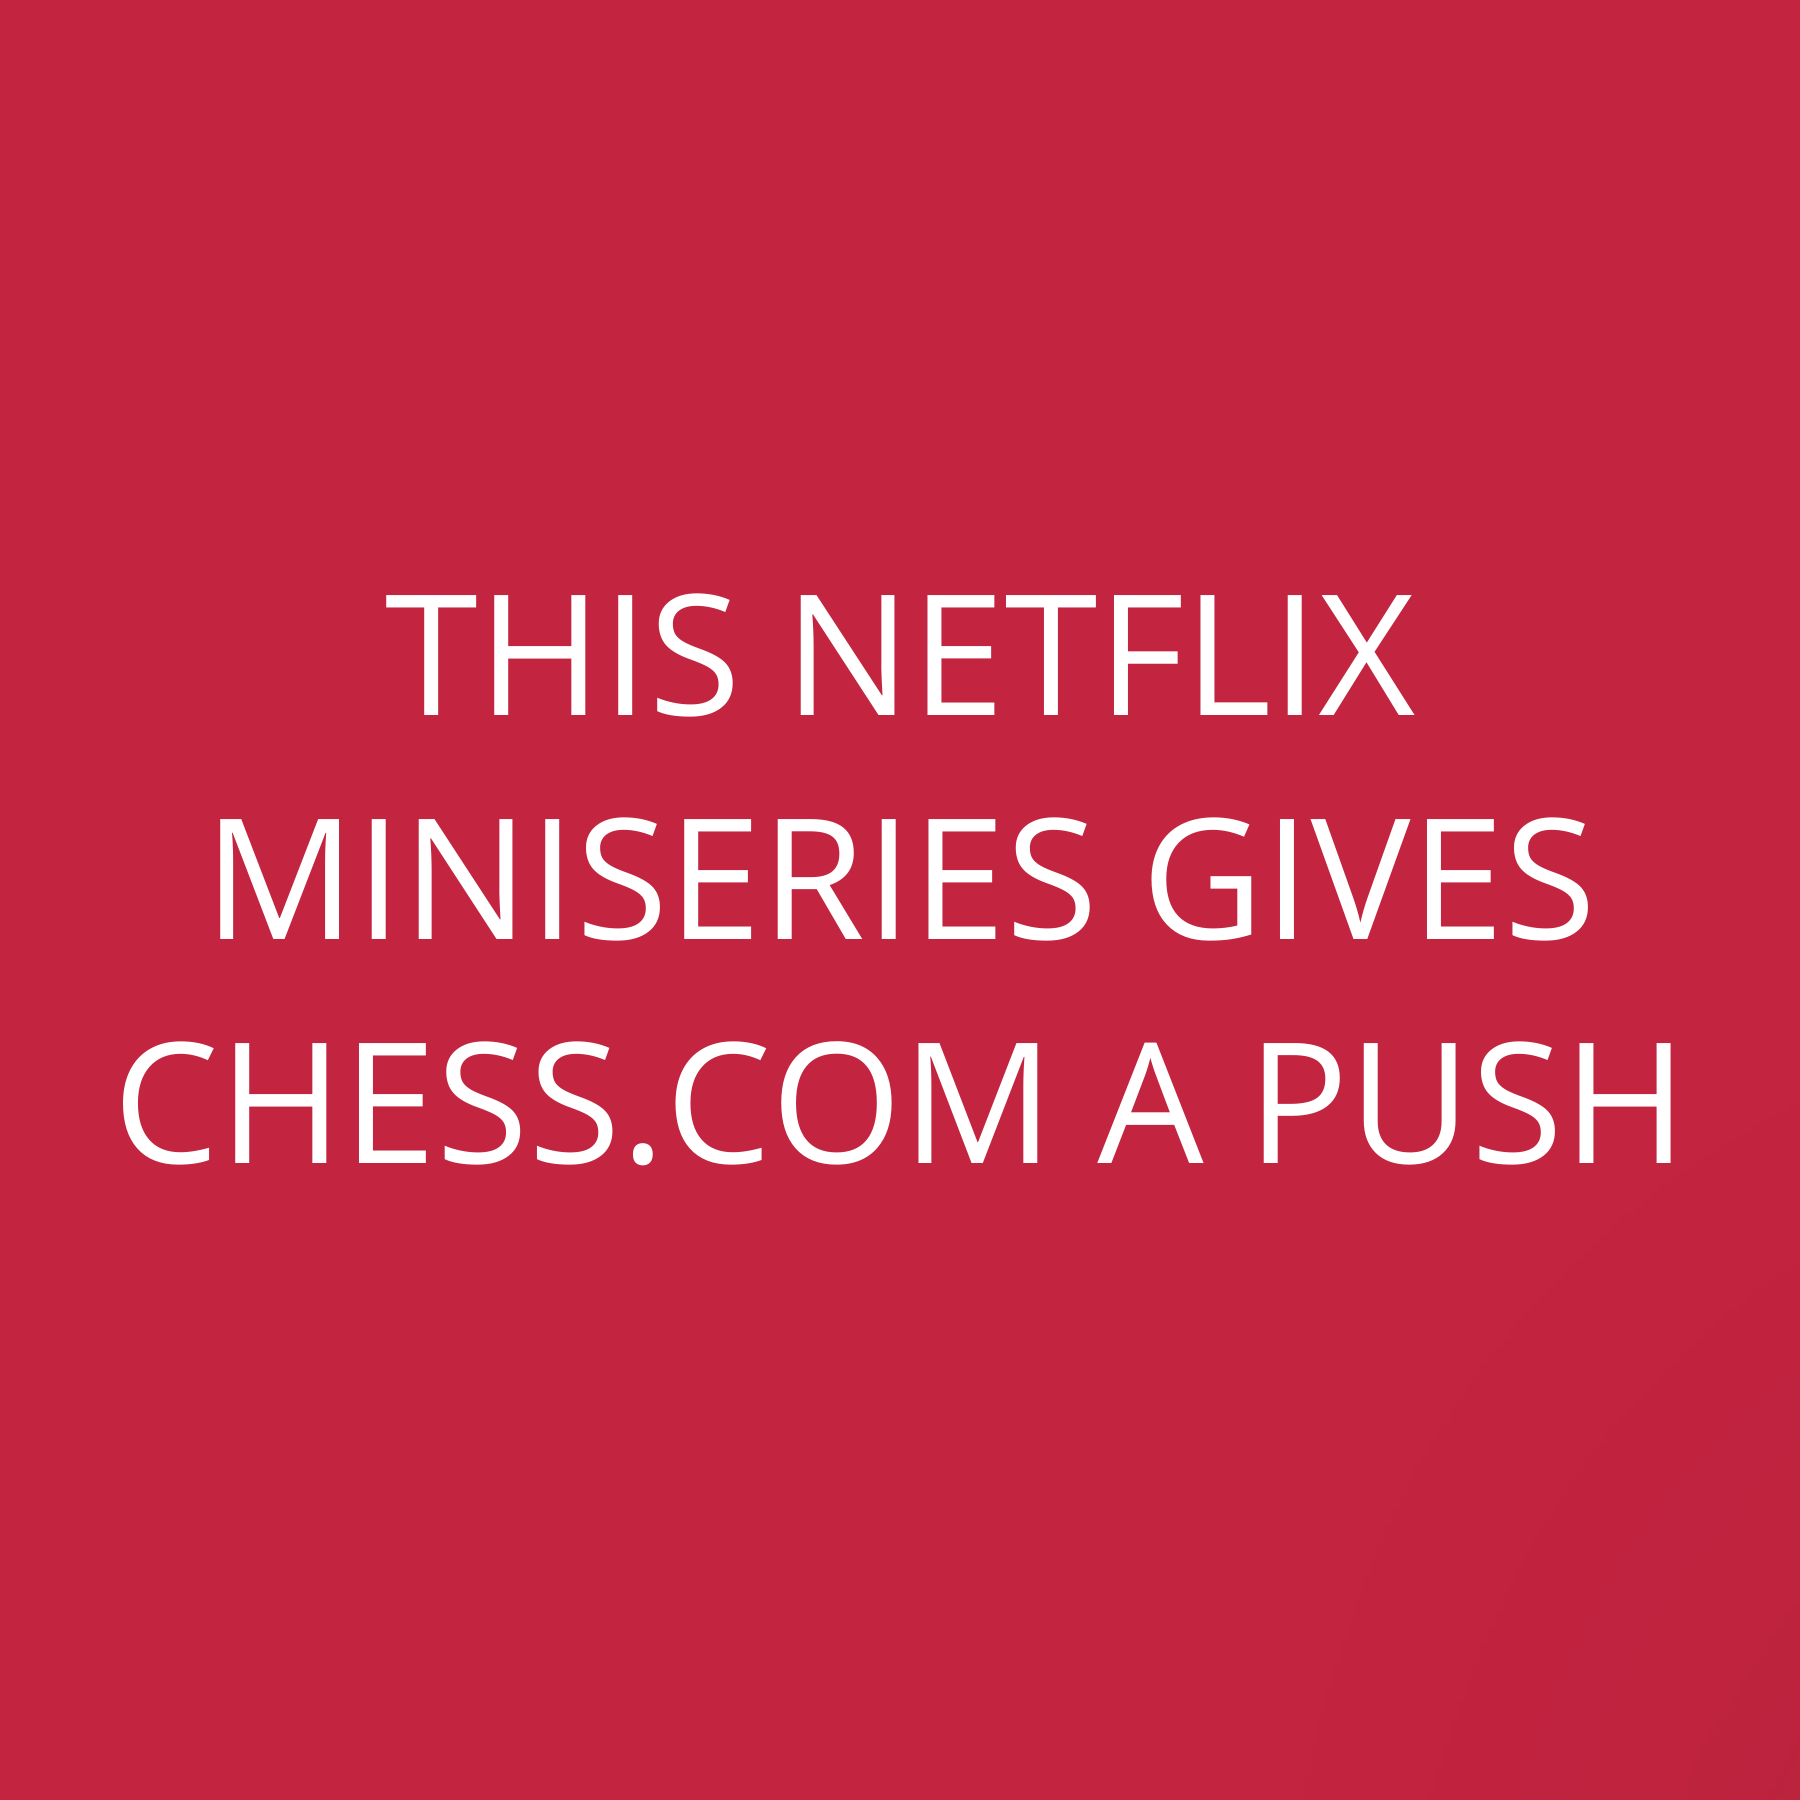 This Netflix miniseries gives Chess.com a push